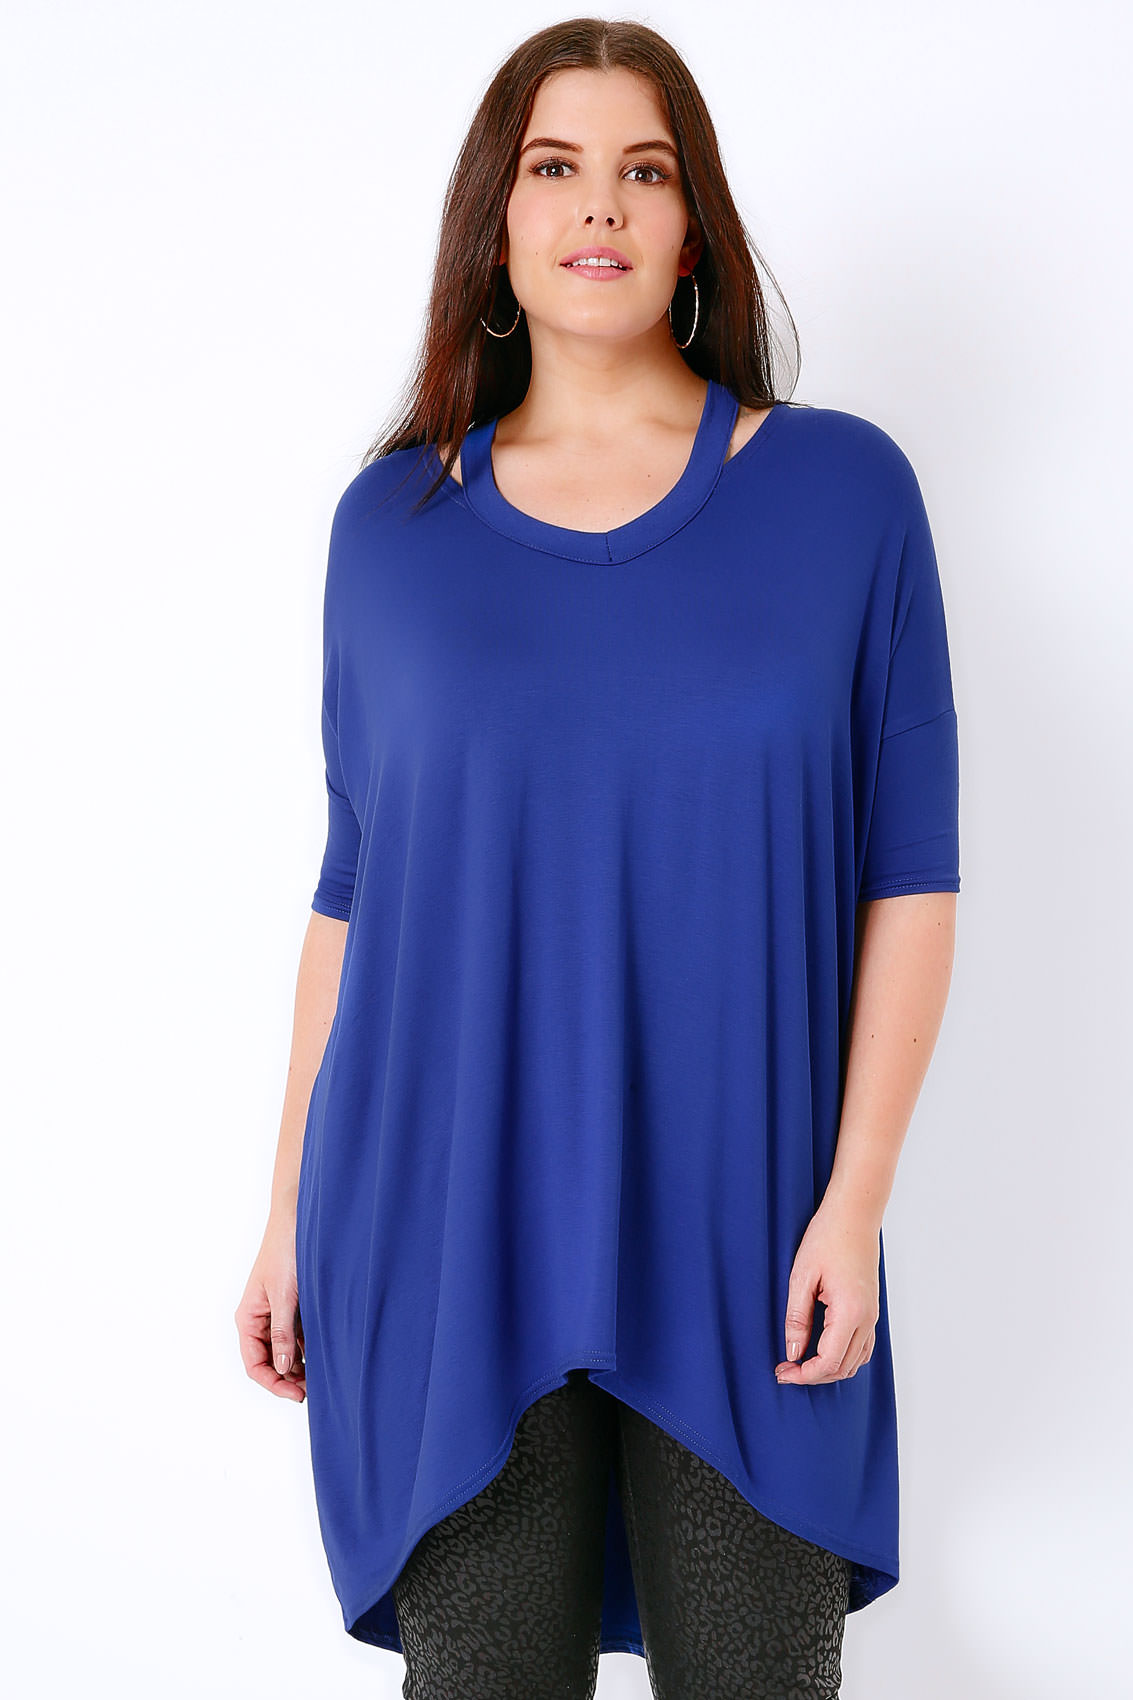 Cobalt Blue Split Neck Top With Extreme Dipped Hem, Plus size 16 to 36